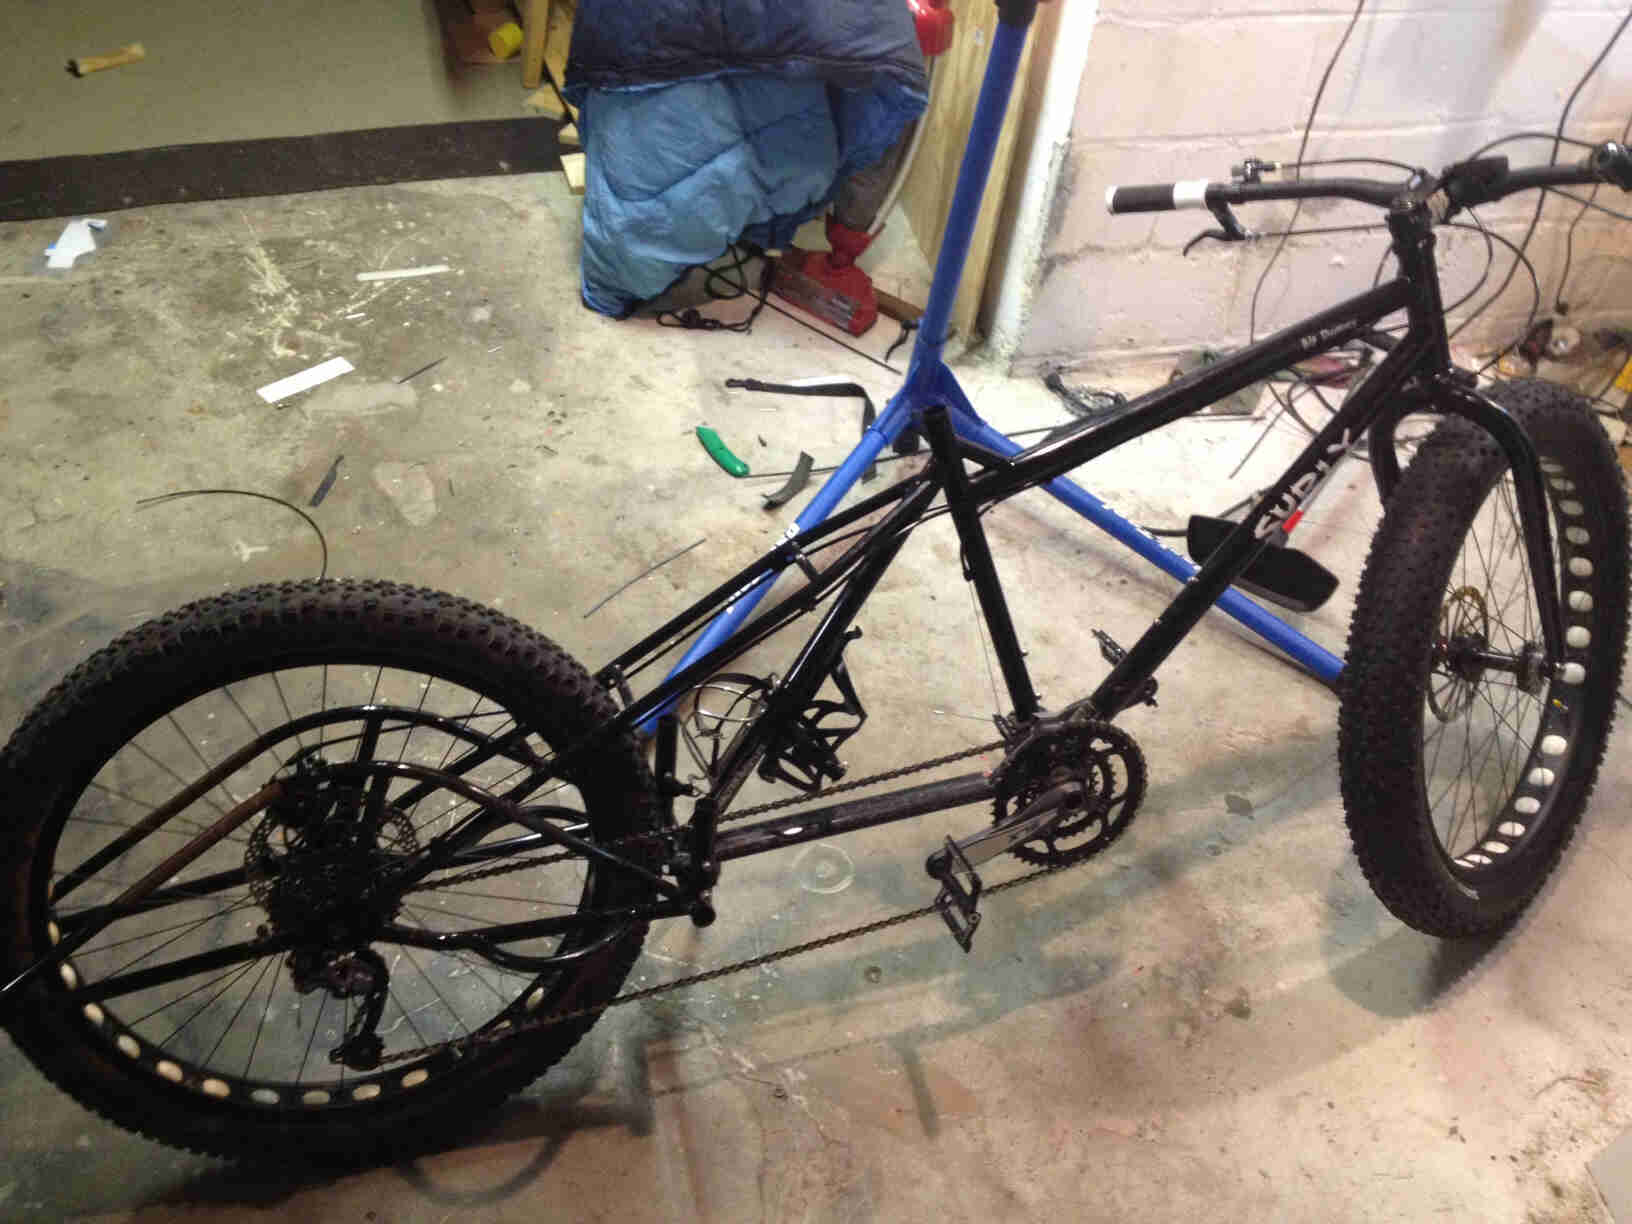 Right side view of a black Surly Big Dummy bike with a front fat wheel, without a seat or post, on a concrete floor